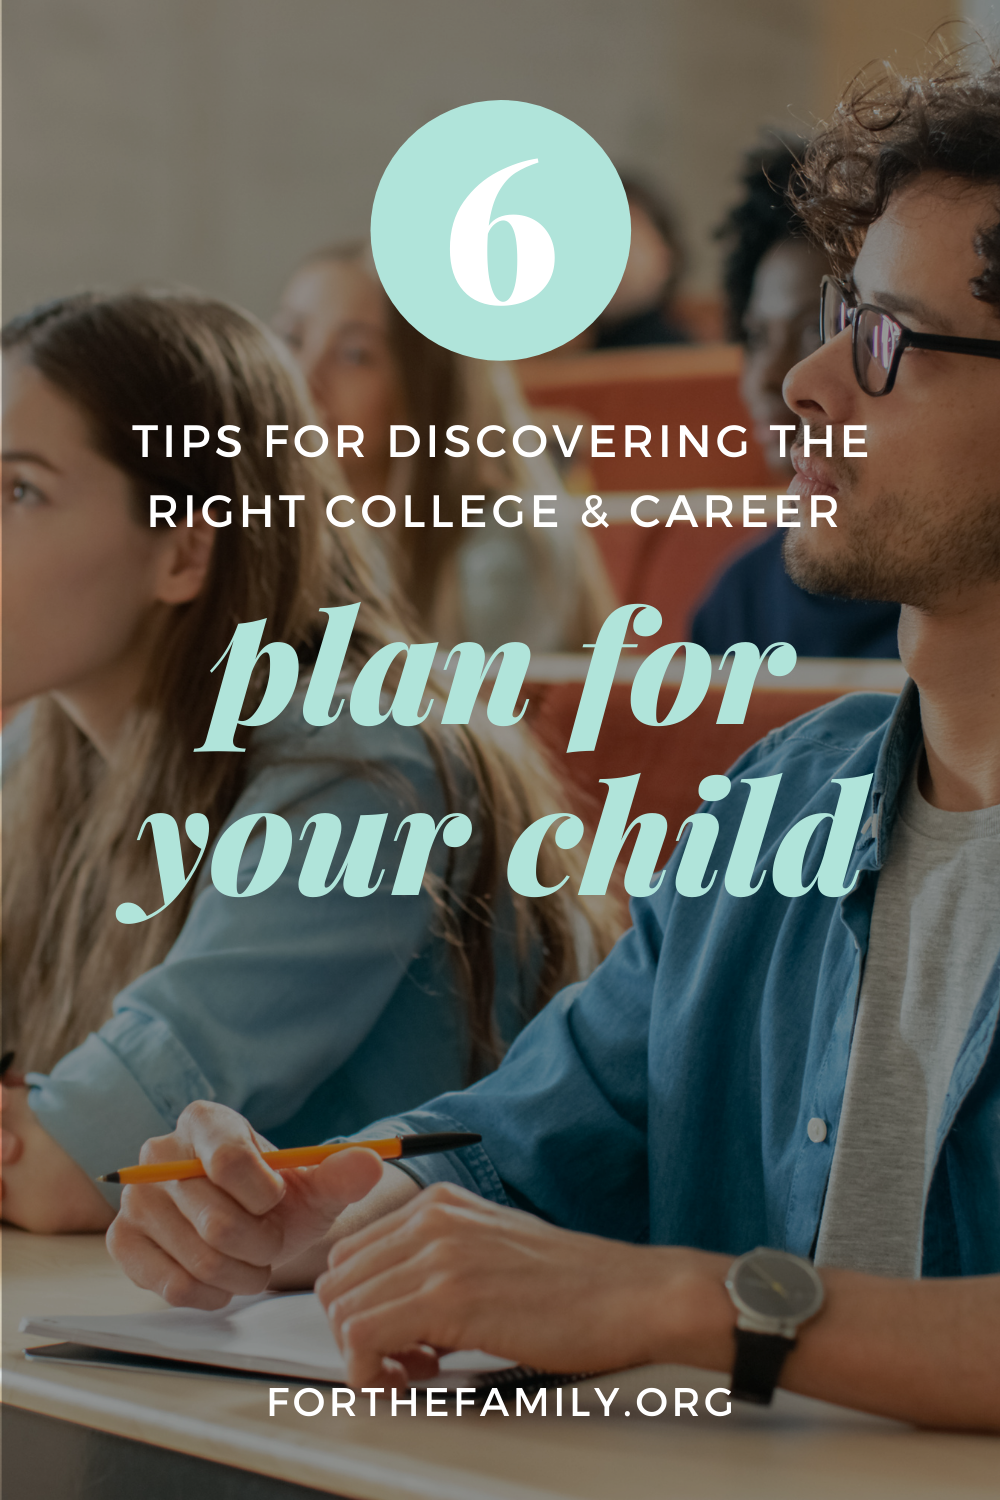 Helping your teen find their post-graduate plans doesn’t have to be a burden or feel overwhelming. It’s actually one of the most rewarding experiences as a parent—helping your student fledge and launch their wings into the life God has for them!